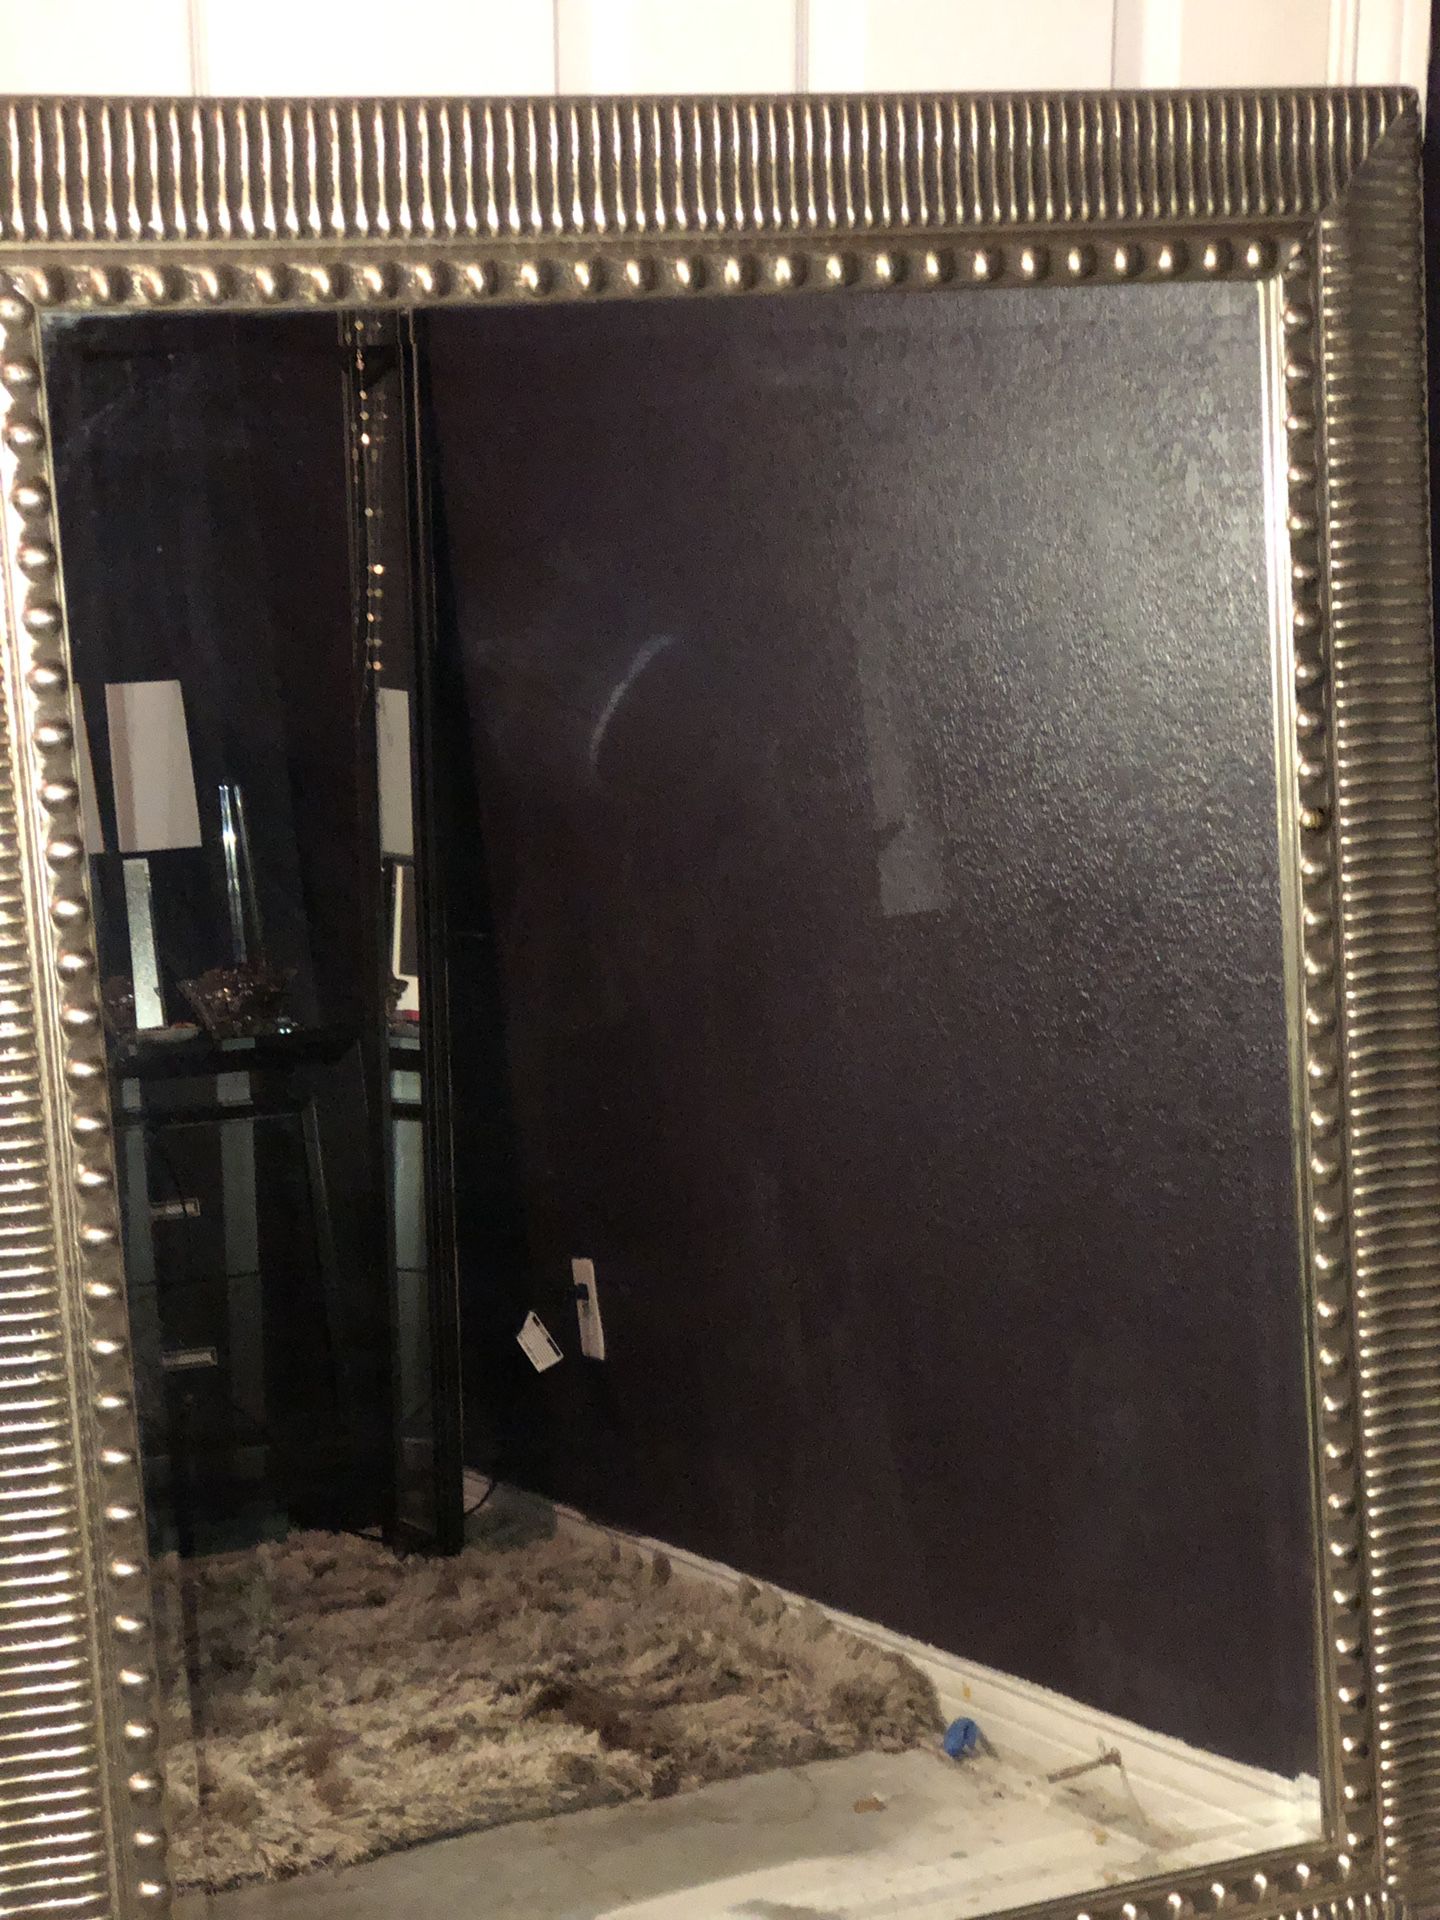 Large silver wall mirror ( approx 3 ft x 4 ft ) beautiful with beveled glass